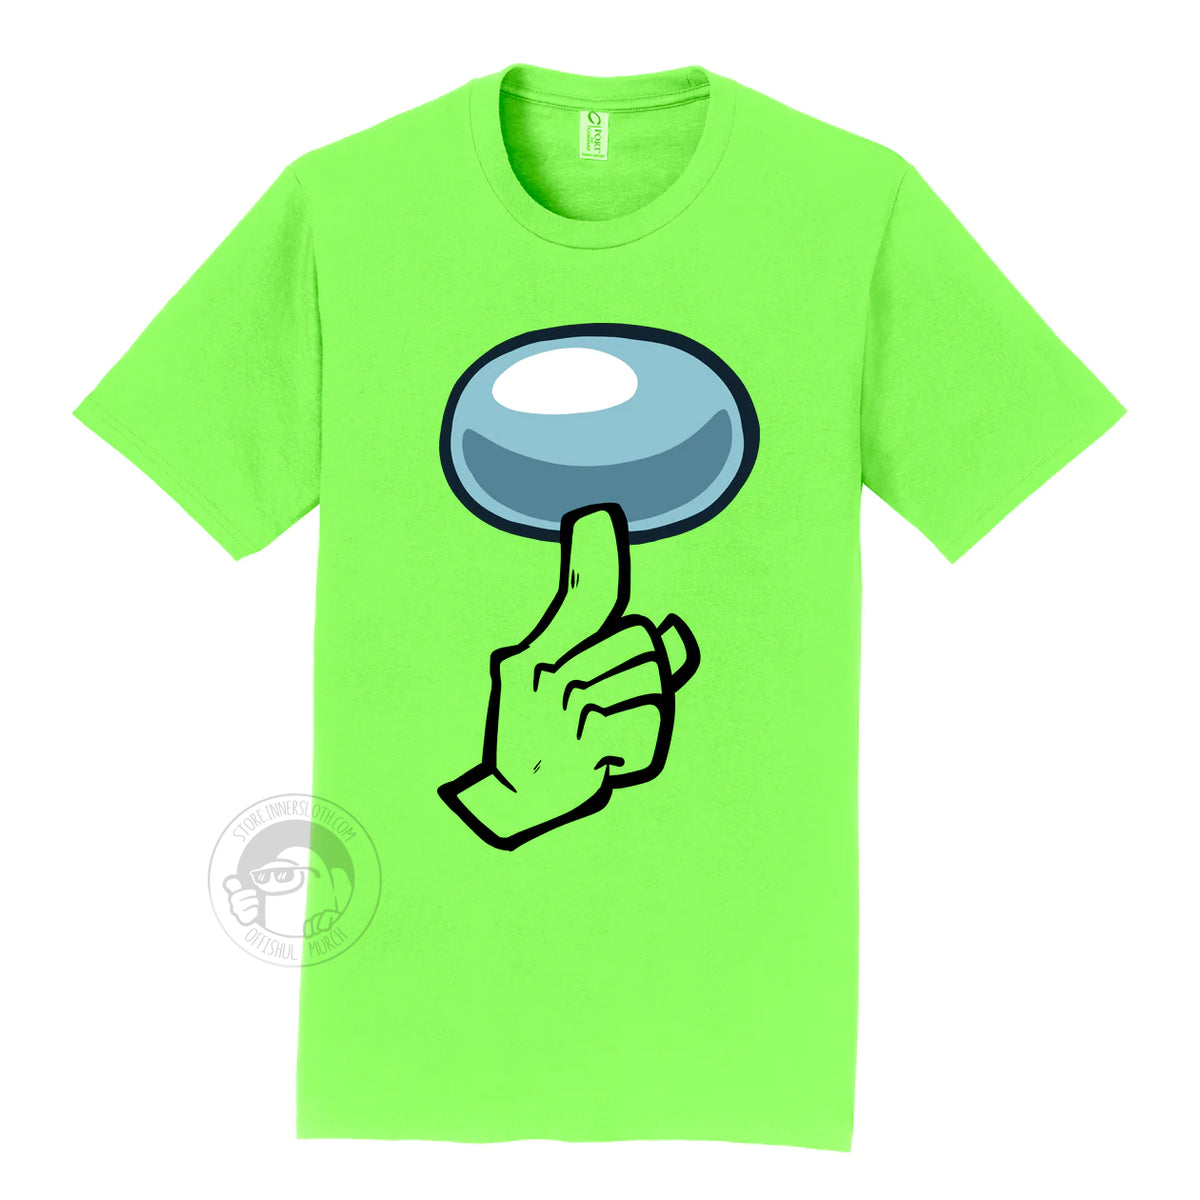 A product photograph of the Among Us: Shhhirt t-shirt in lime green. The art on the shirt shows the crewmate visor and a hand with one finger pointing up in a “shh”ing pose. 